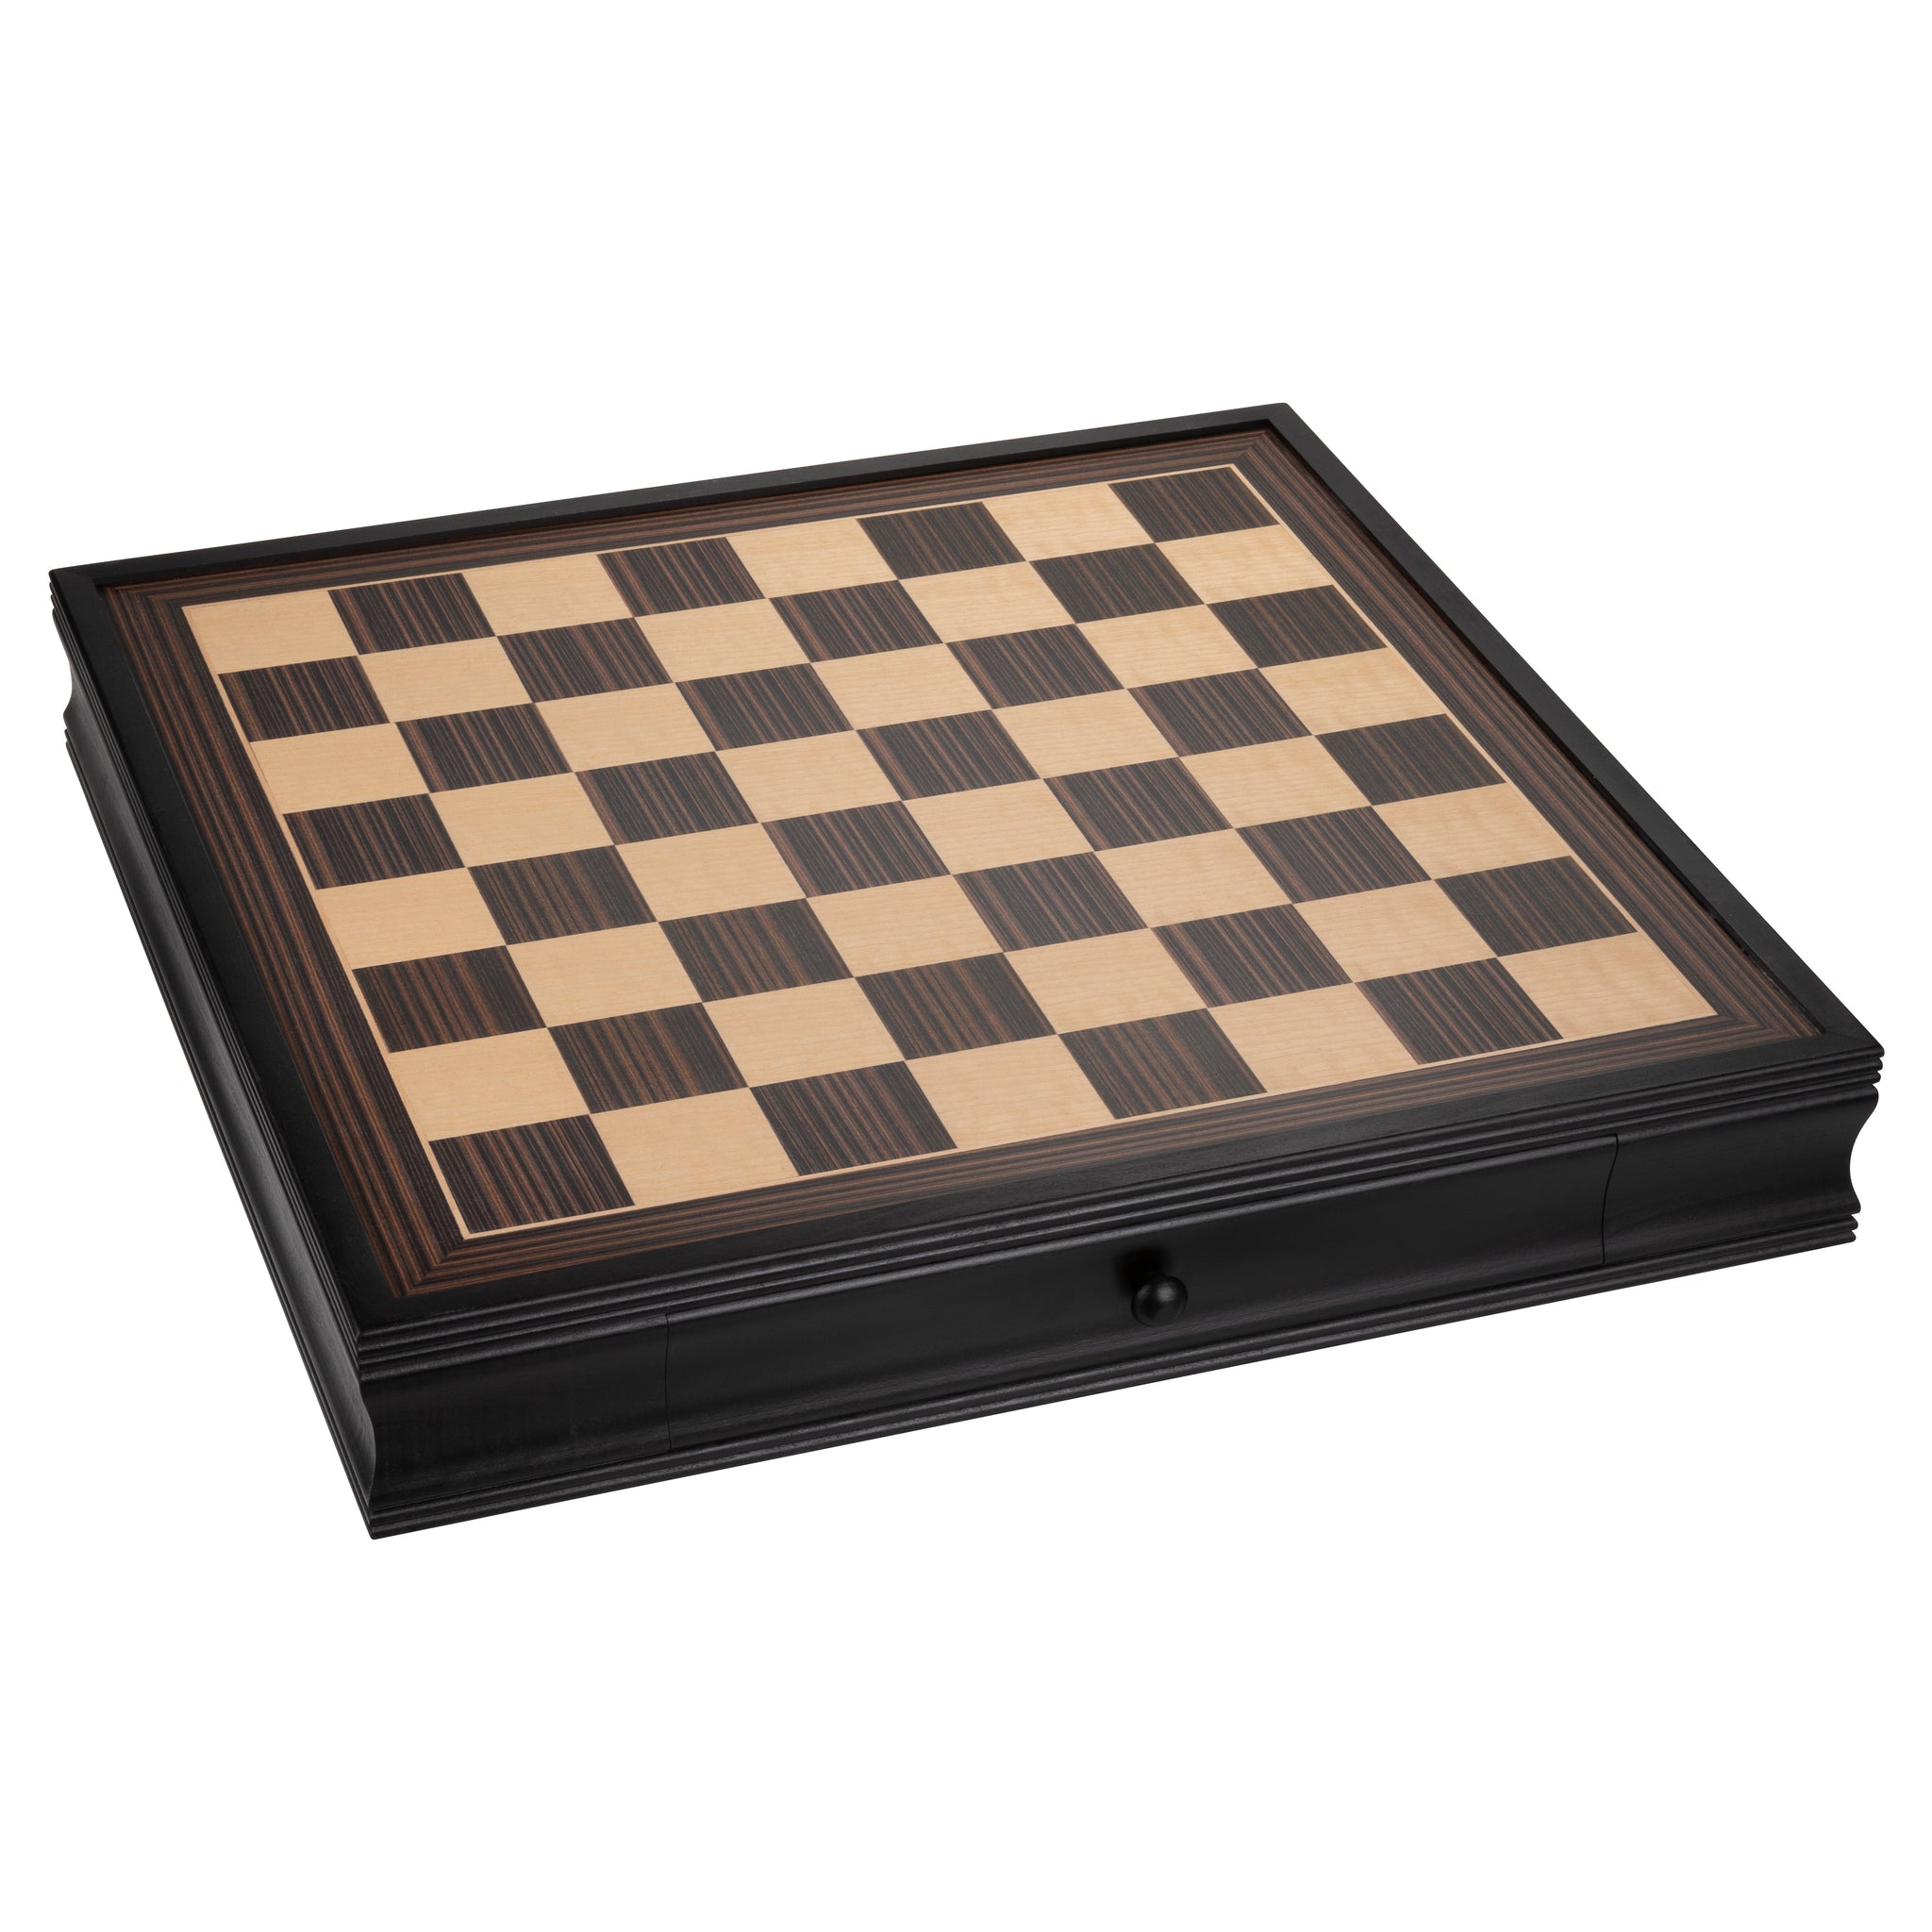 Deluxe Chess Board with Storage Drawers Black Stained Wood 19 in